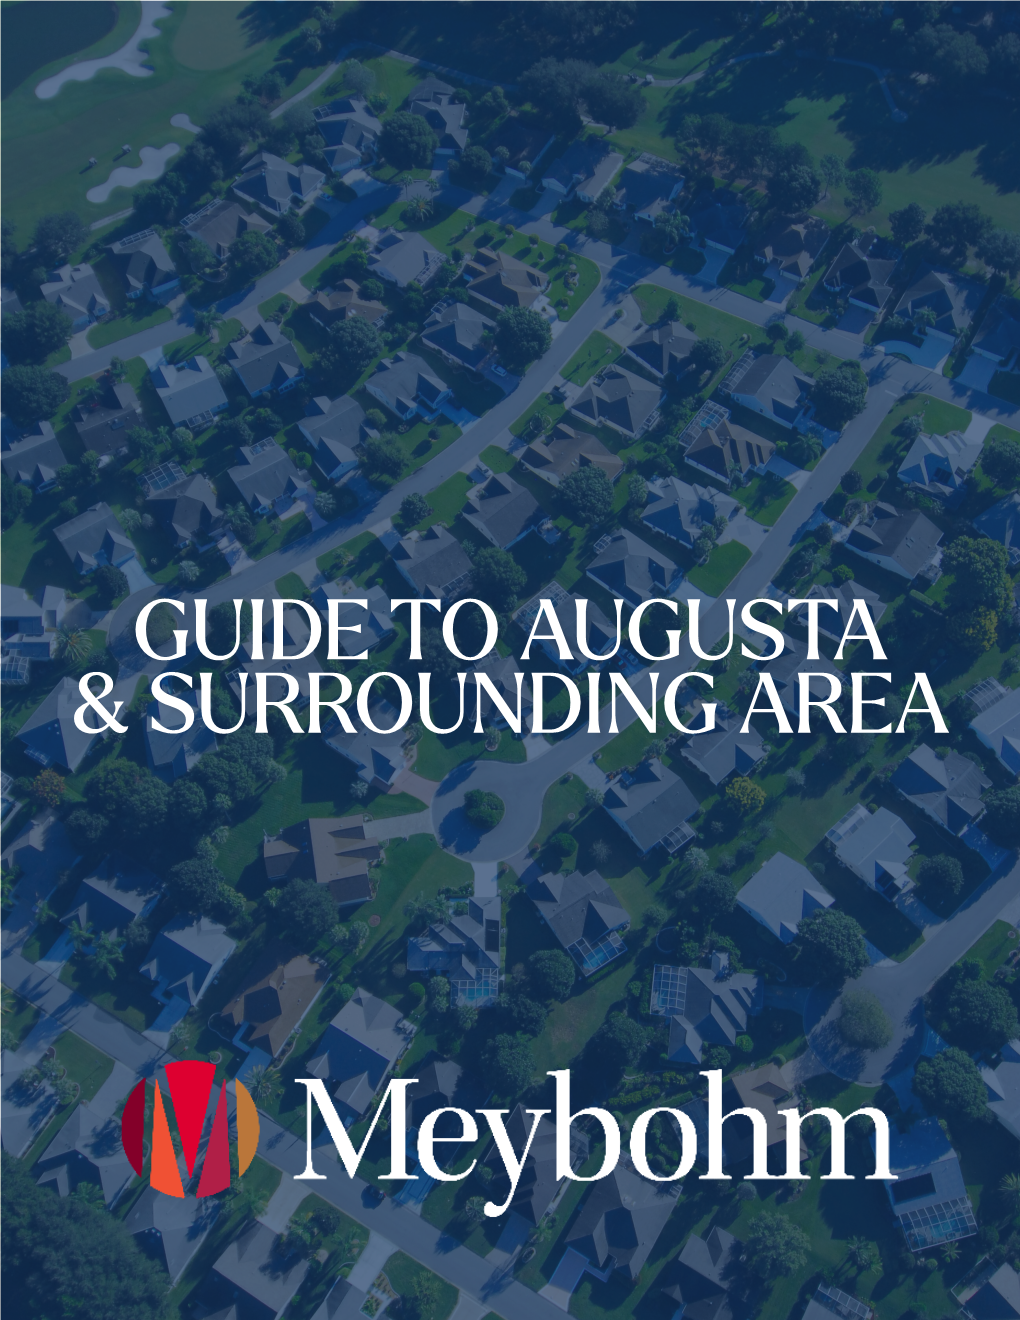 Guide to Augusta & Surrounding Area